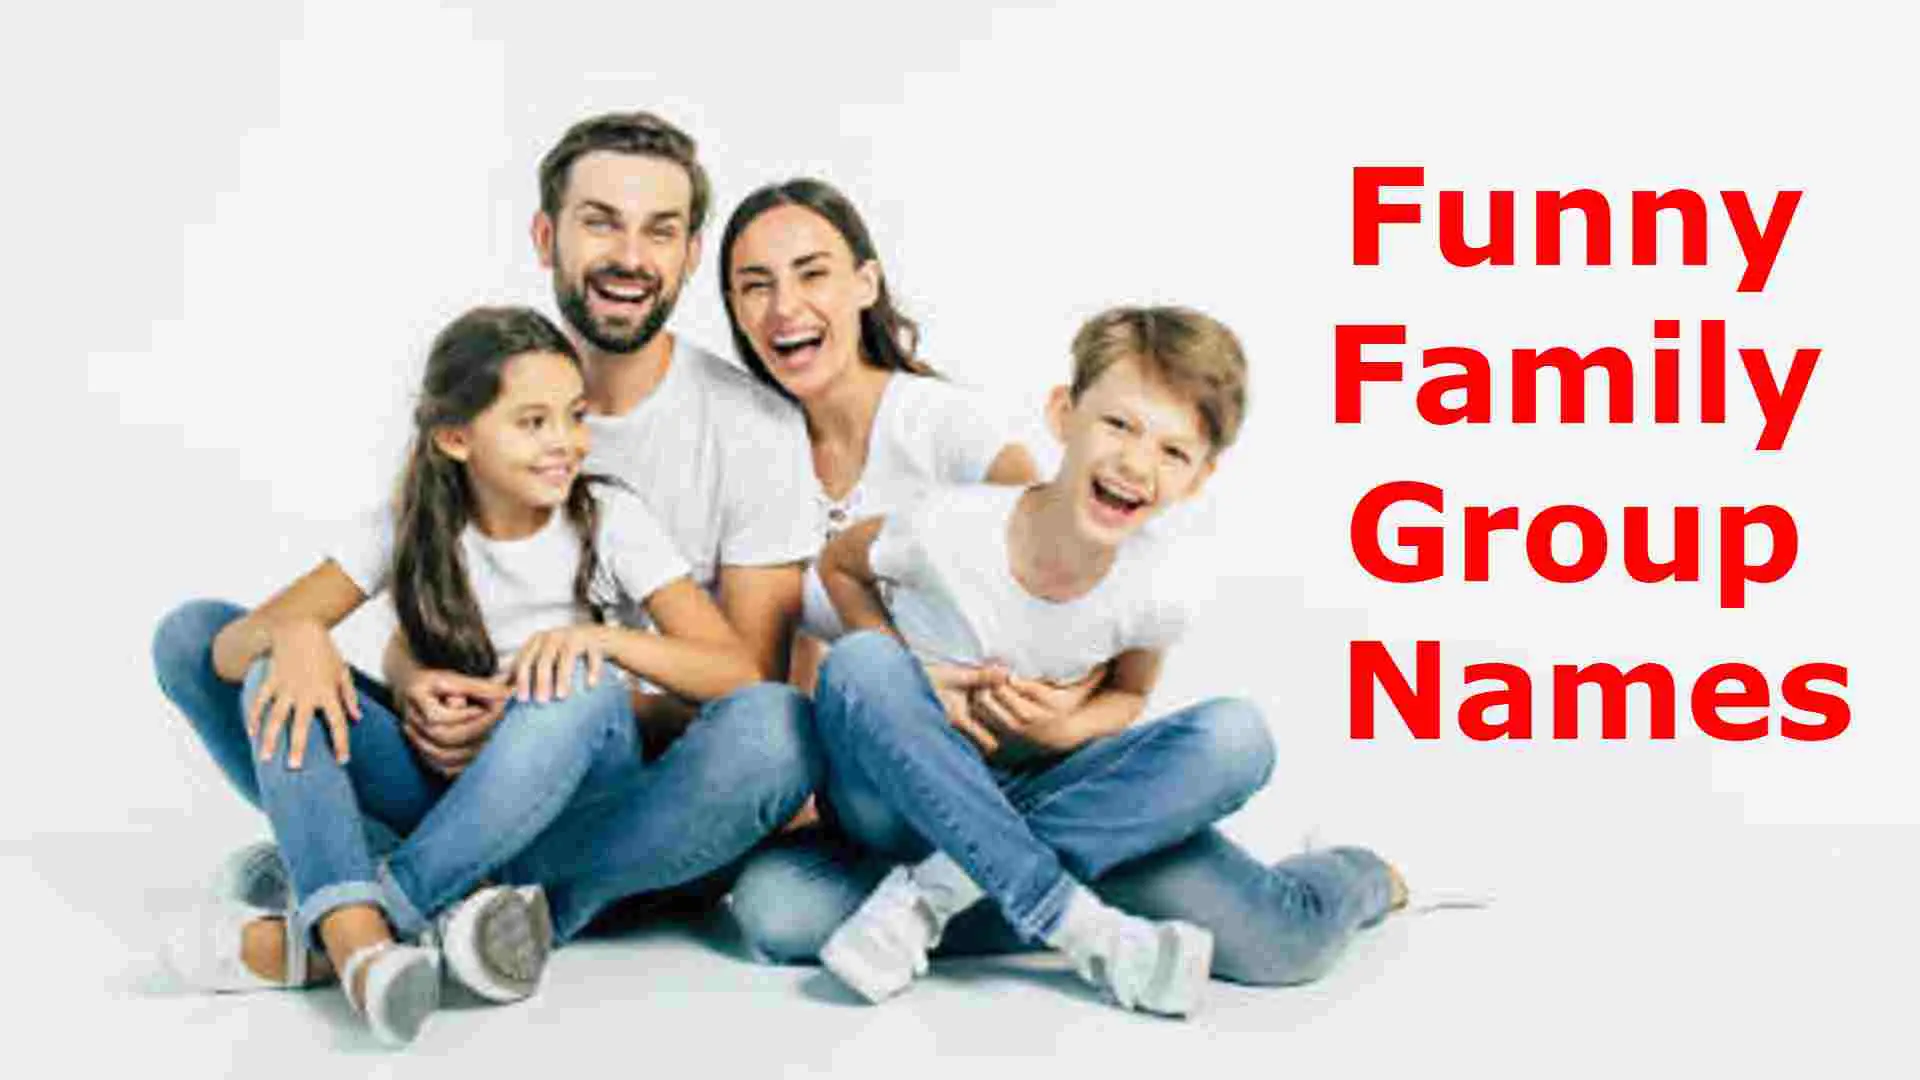 Funny Family Group Names